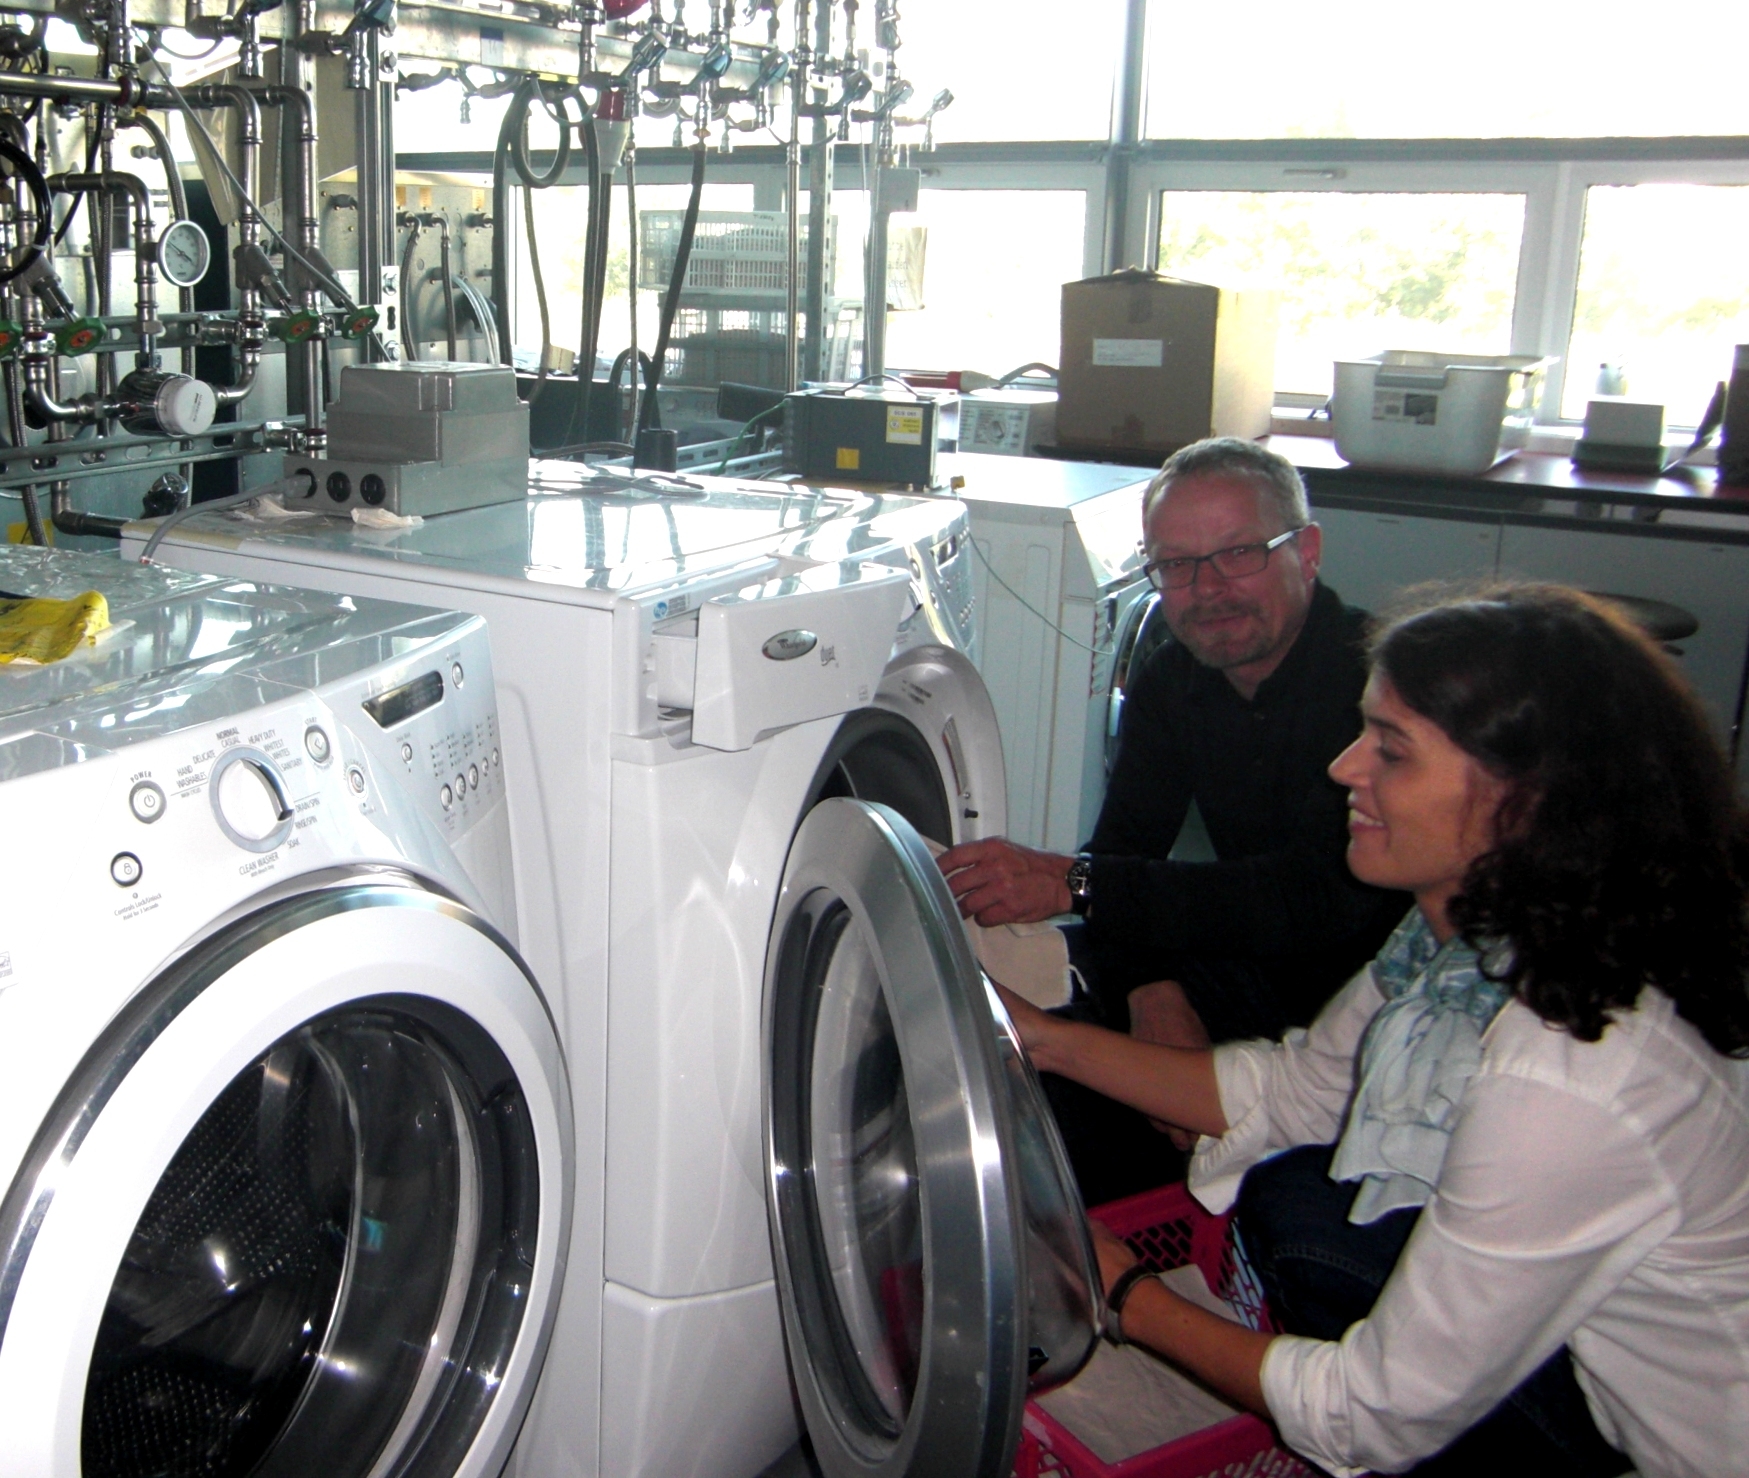 The photo shows Daniel Fäh, Managing Director Empa Testmaterials AG, and his colleague Caroline Amberg, project manager microbiology, in the laundry room loading test fabrics into the washing machine.